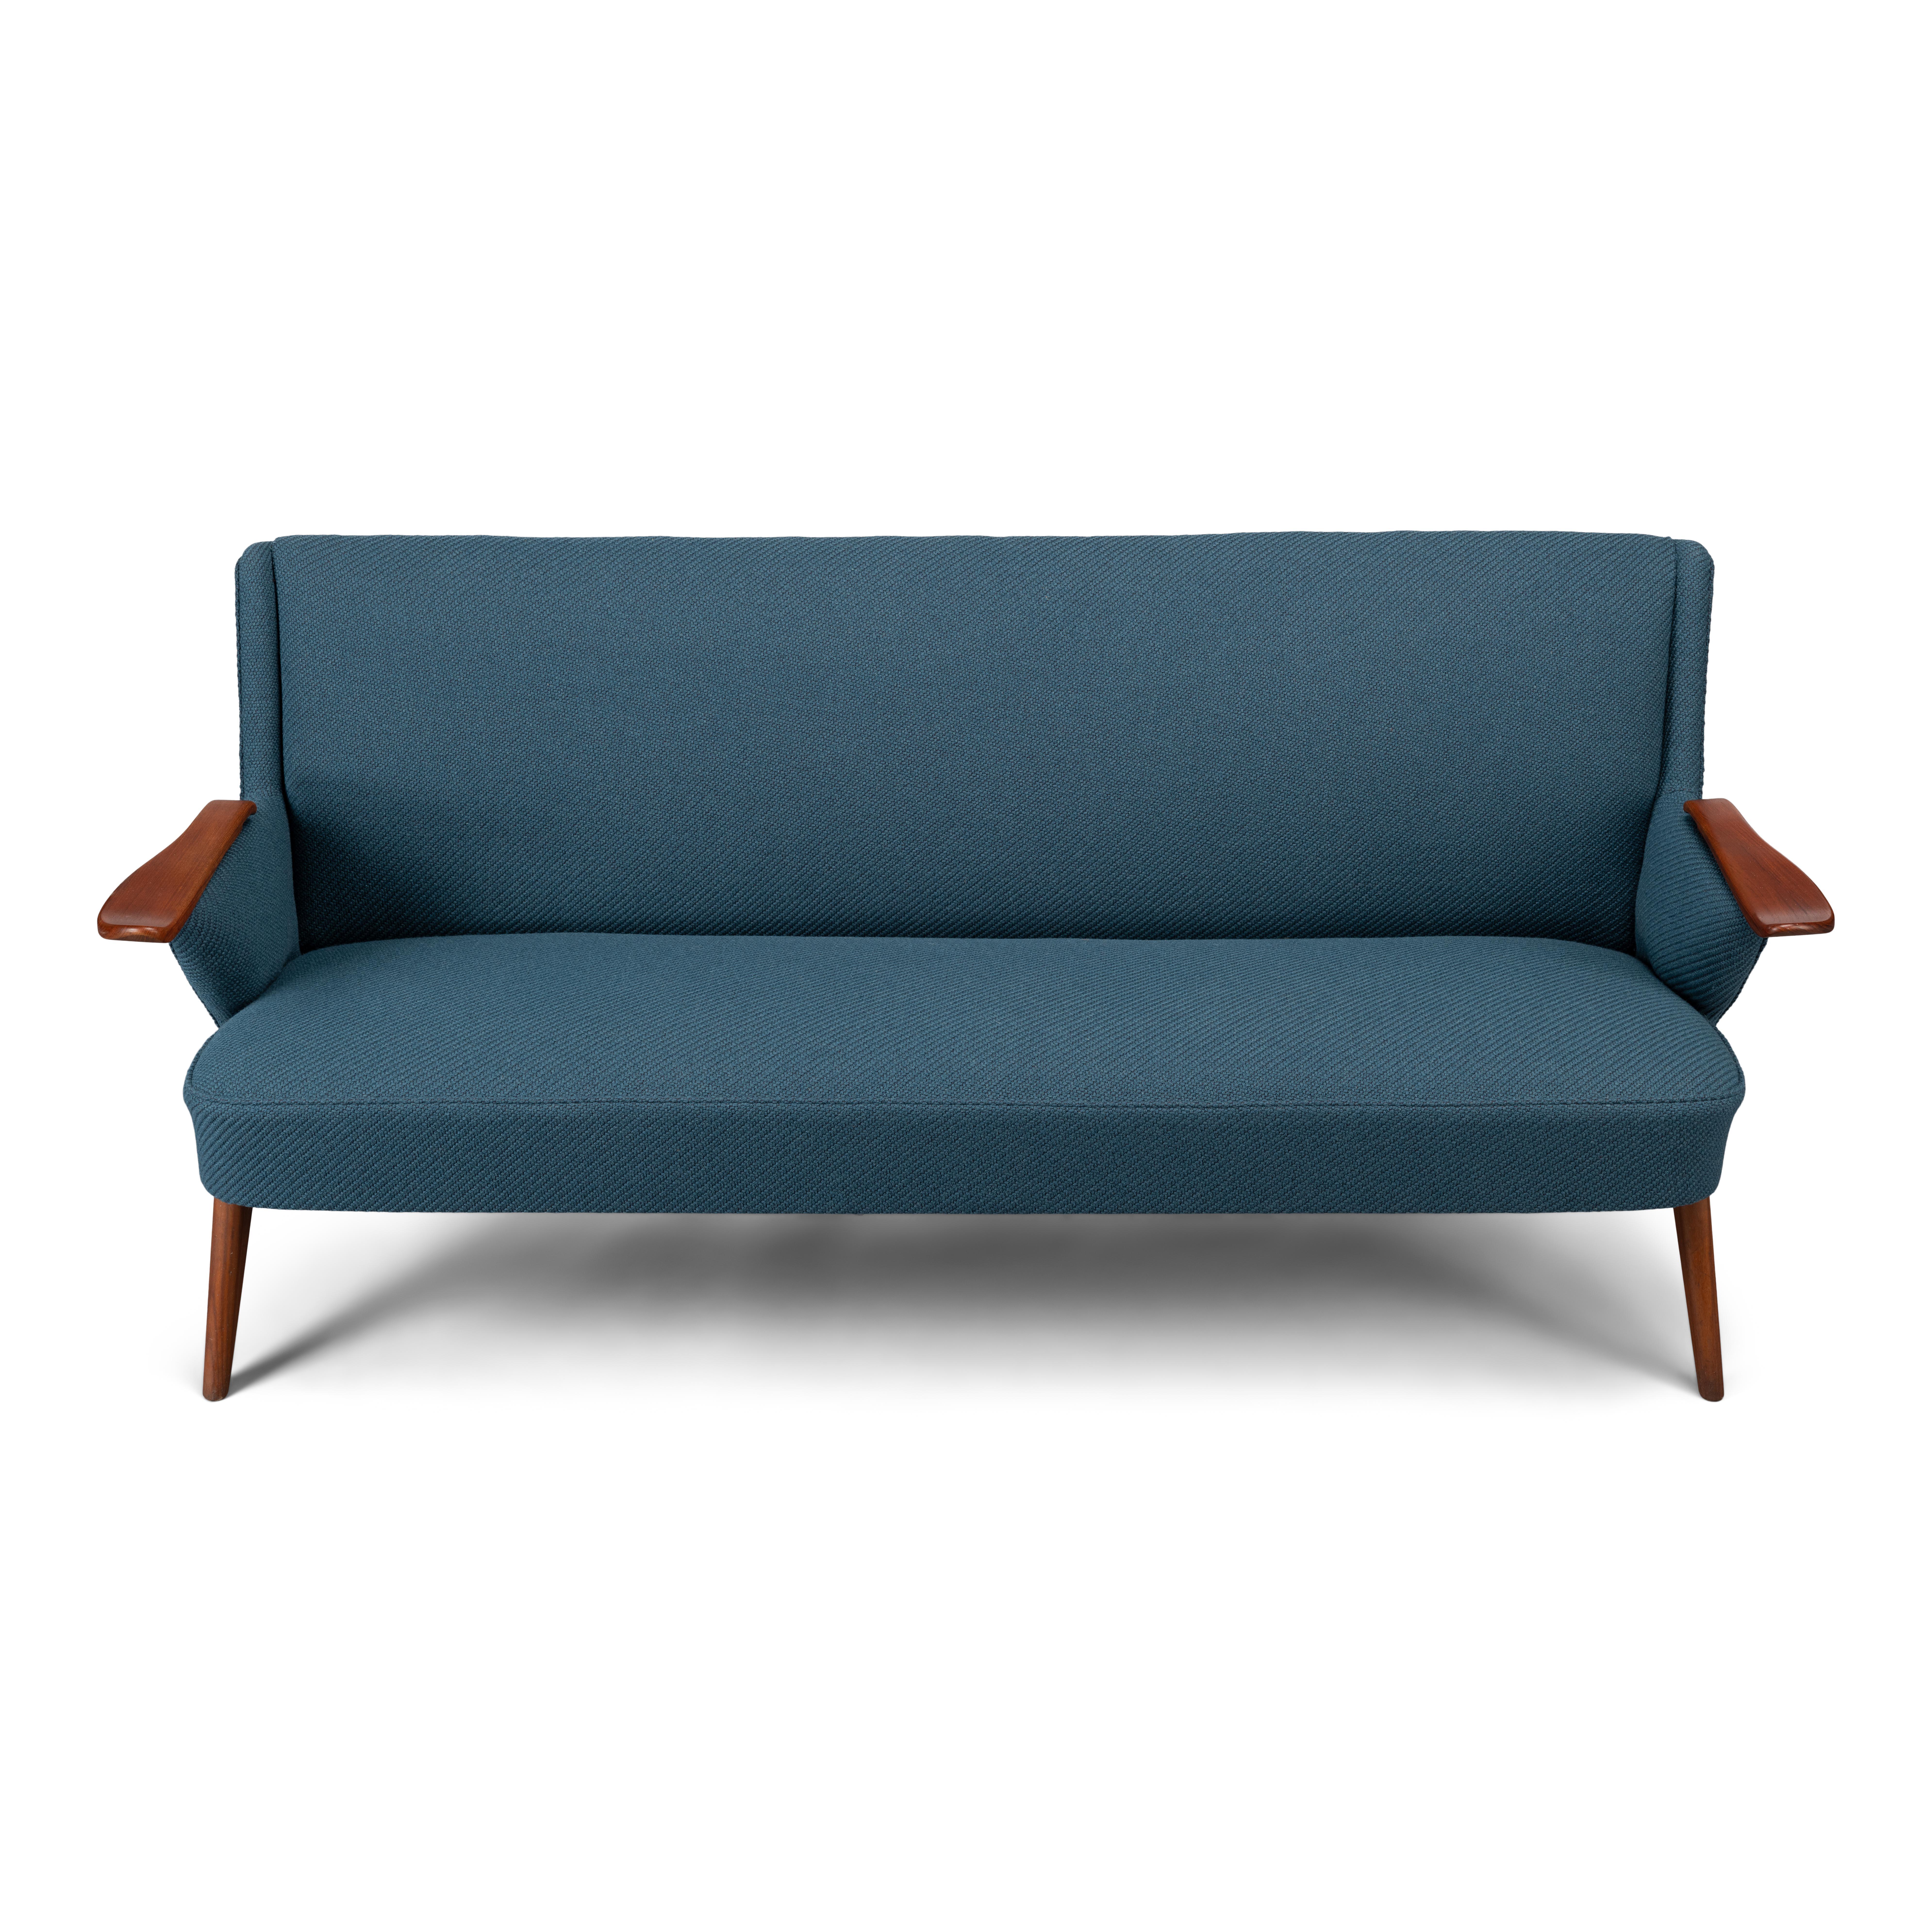 Edgy Johannes Andersen sofa for CFC Silkeborg sofa in stunning new upholstery. This sofa is reupholstered with Kvadrat Coda 2 no. 762. This fabric is designed by Norway Says, the fabric combines a graphic, textured surface and sophisticated colors